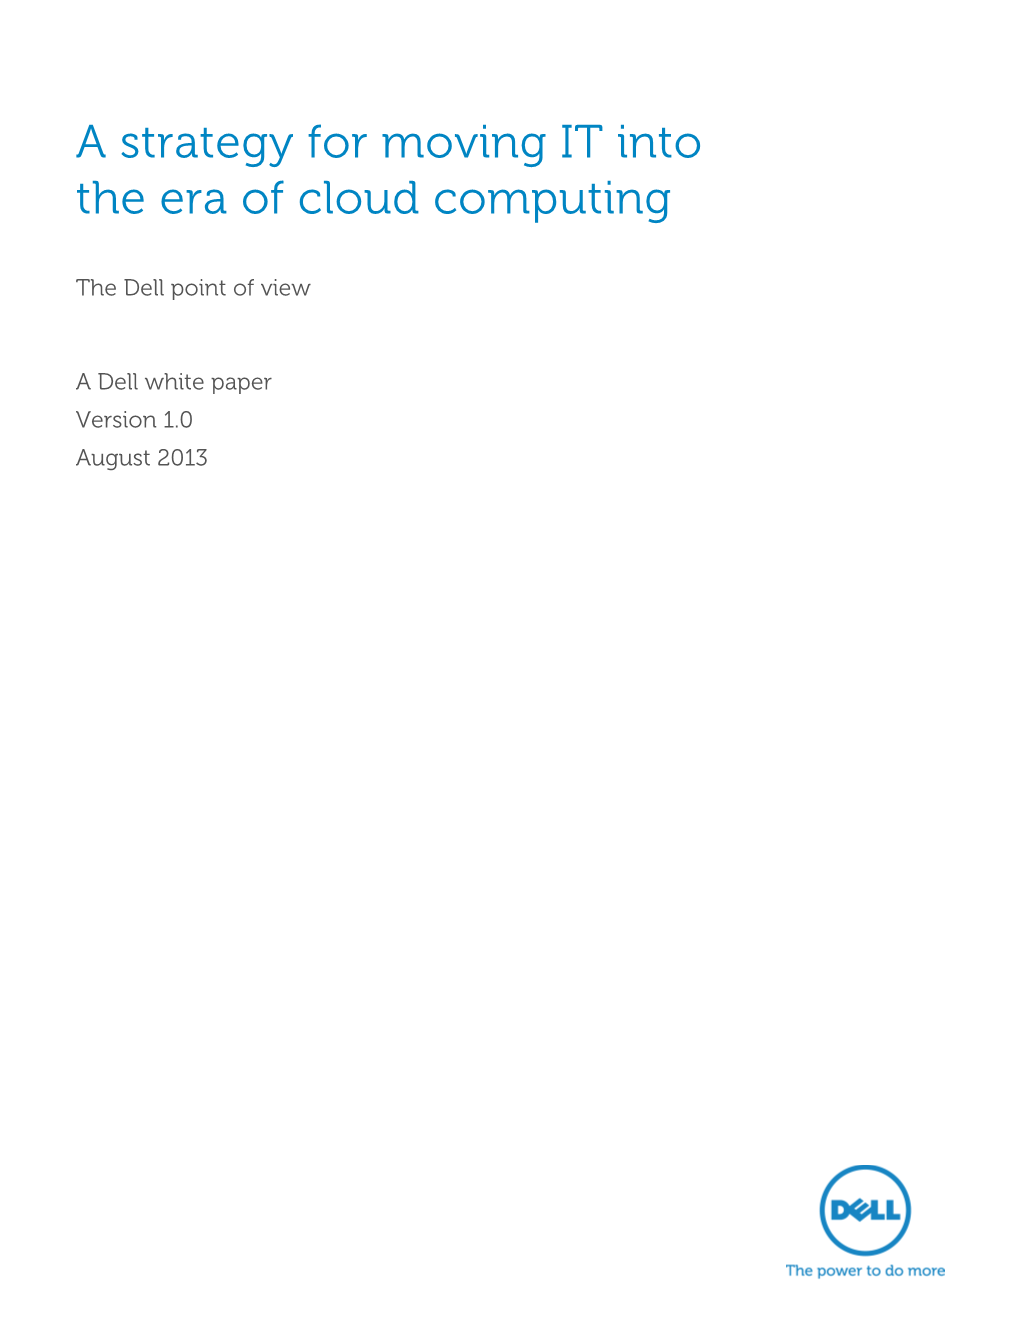 A Strategy for Moving IT Into the Era of Cloud Computing